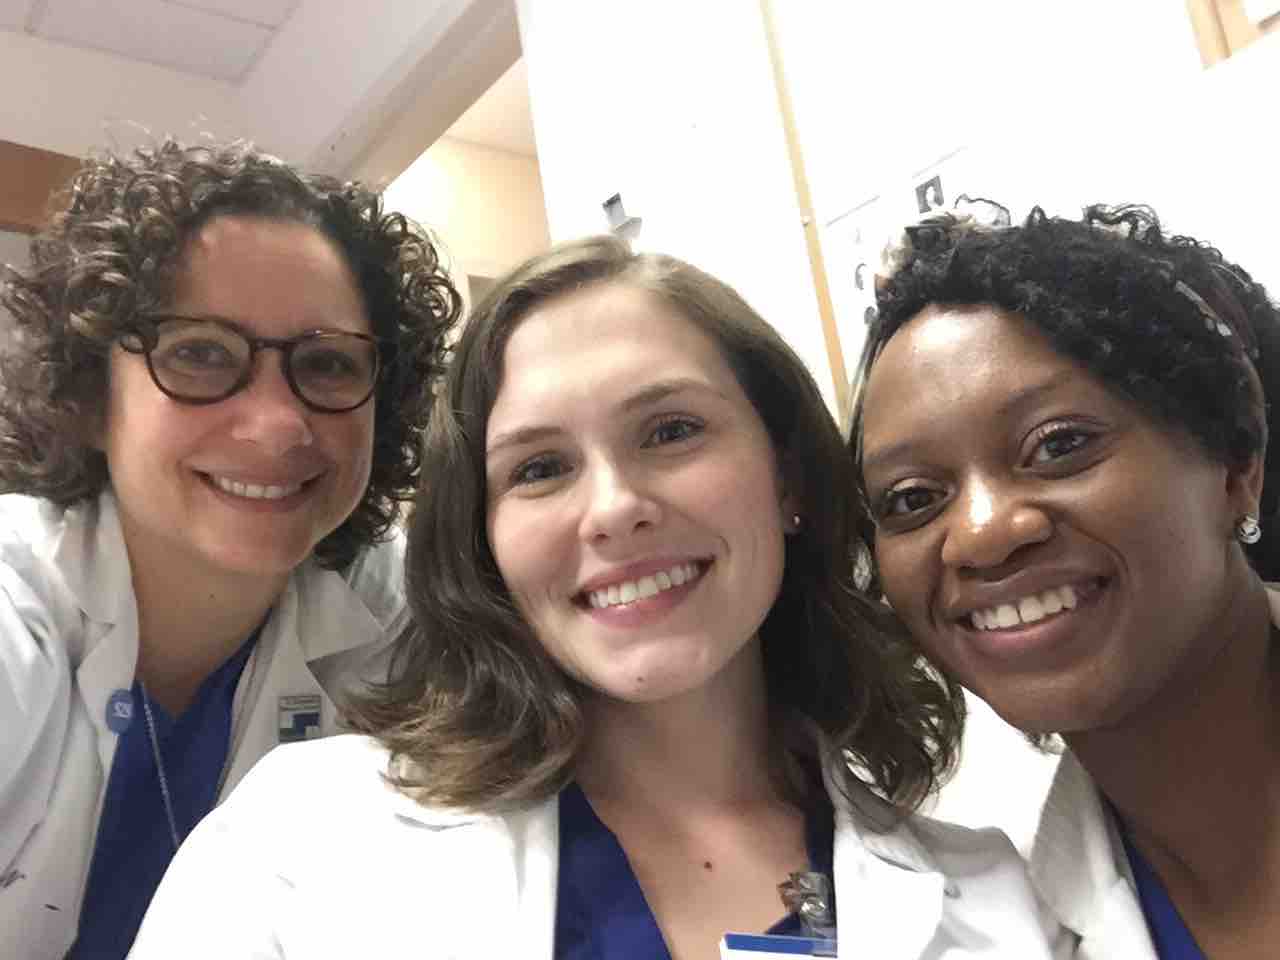 Kathryn Carr, CNM, (left) pictured with SNMs Nicole Mapes (center) and Cecile Sampson (right).